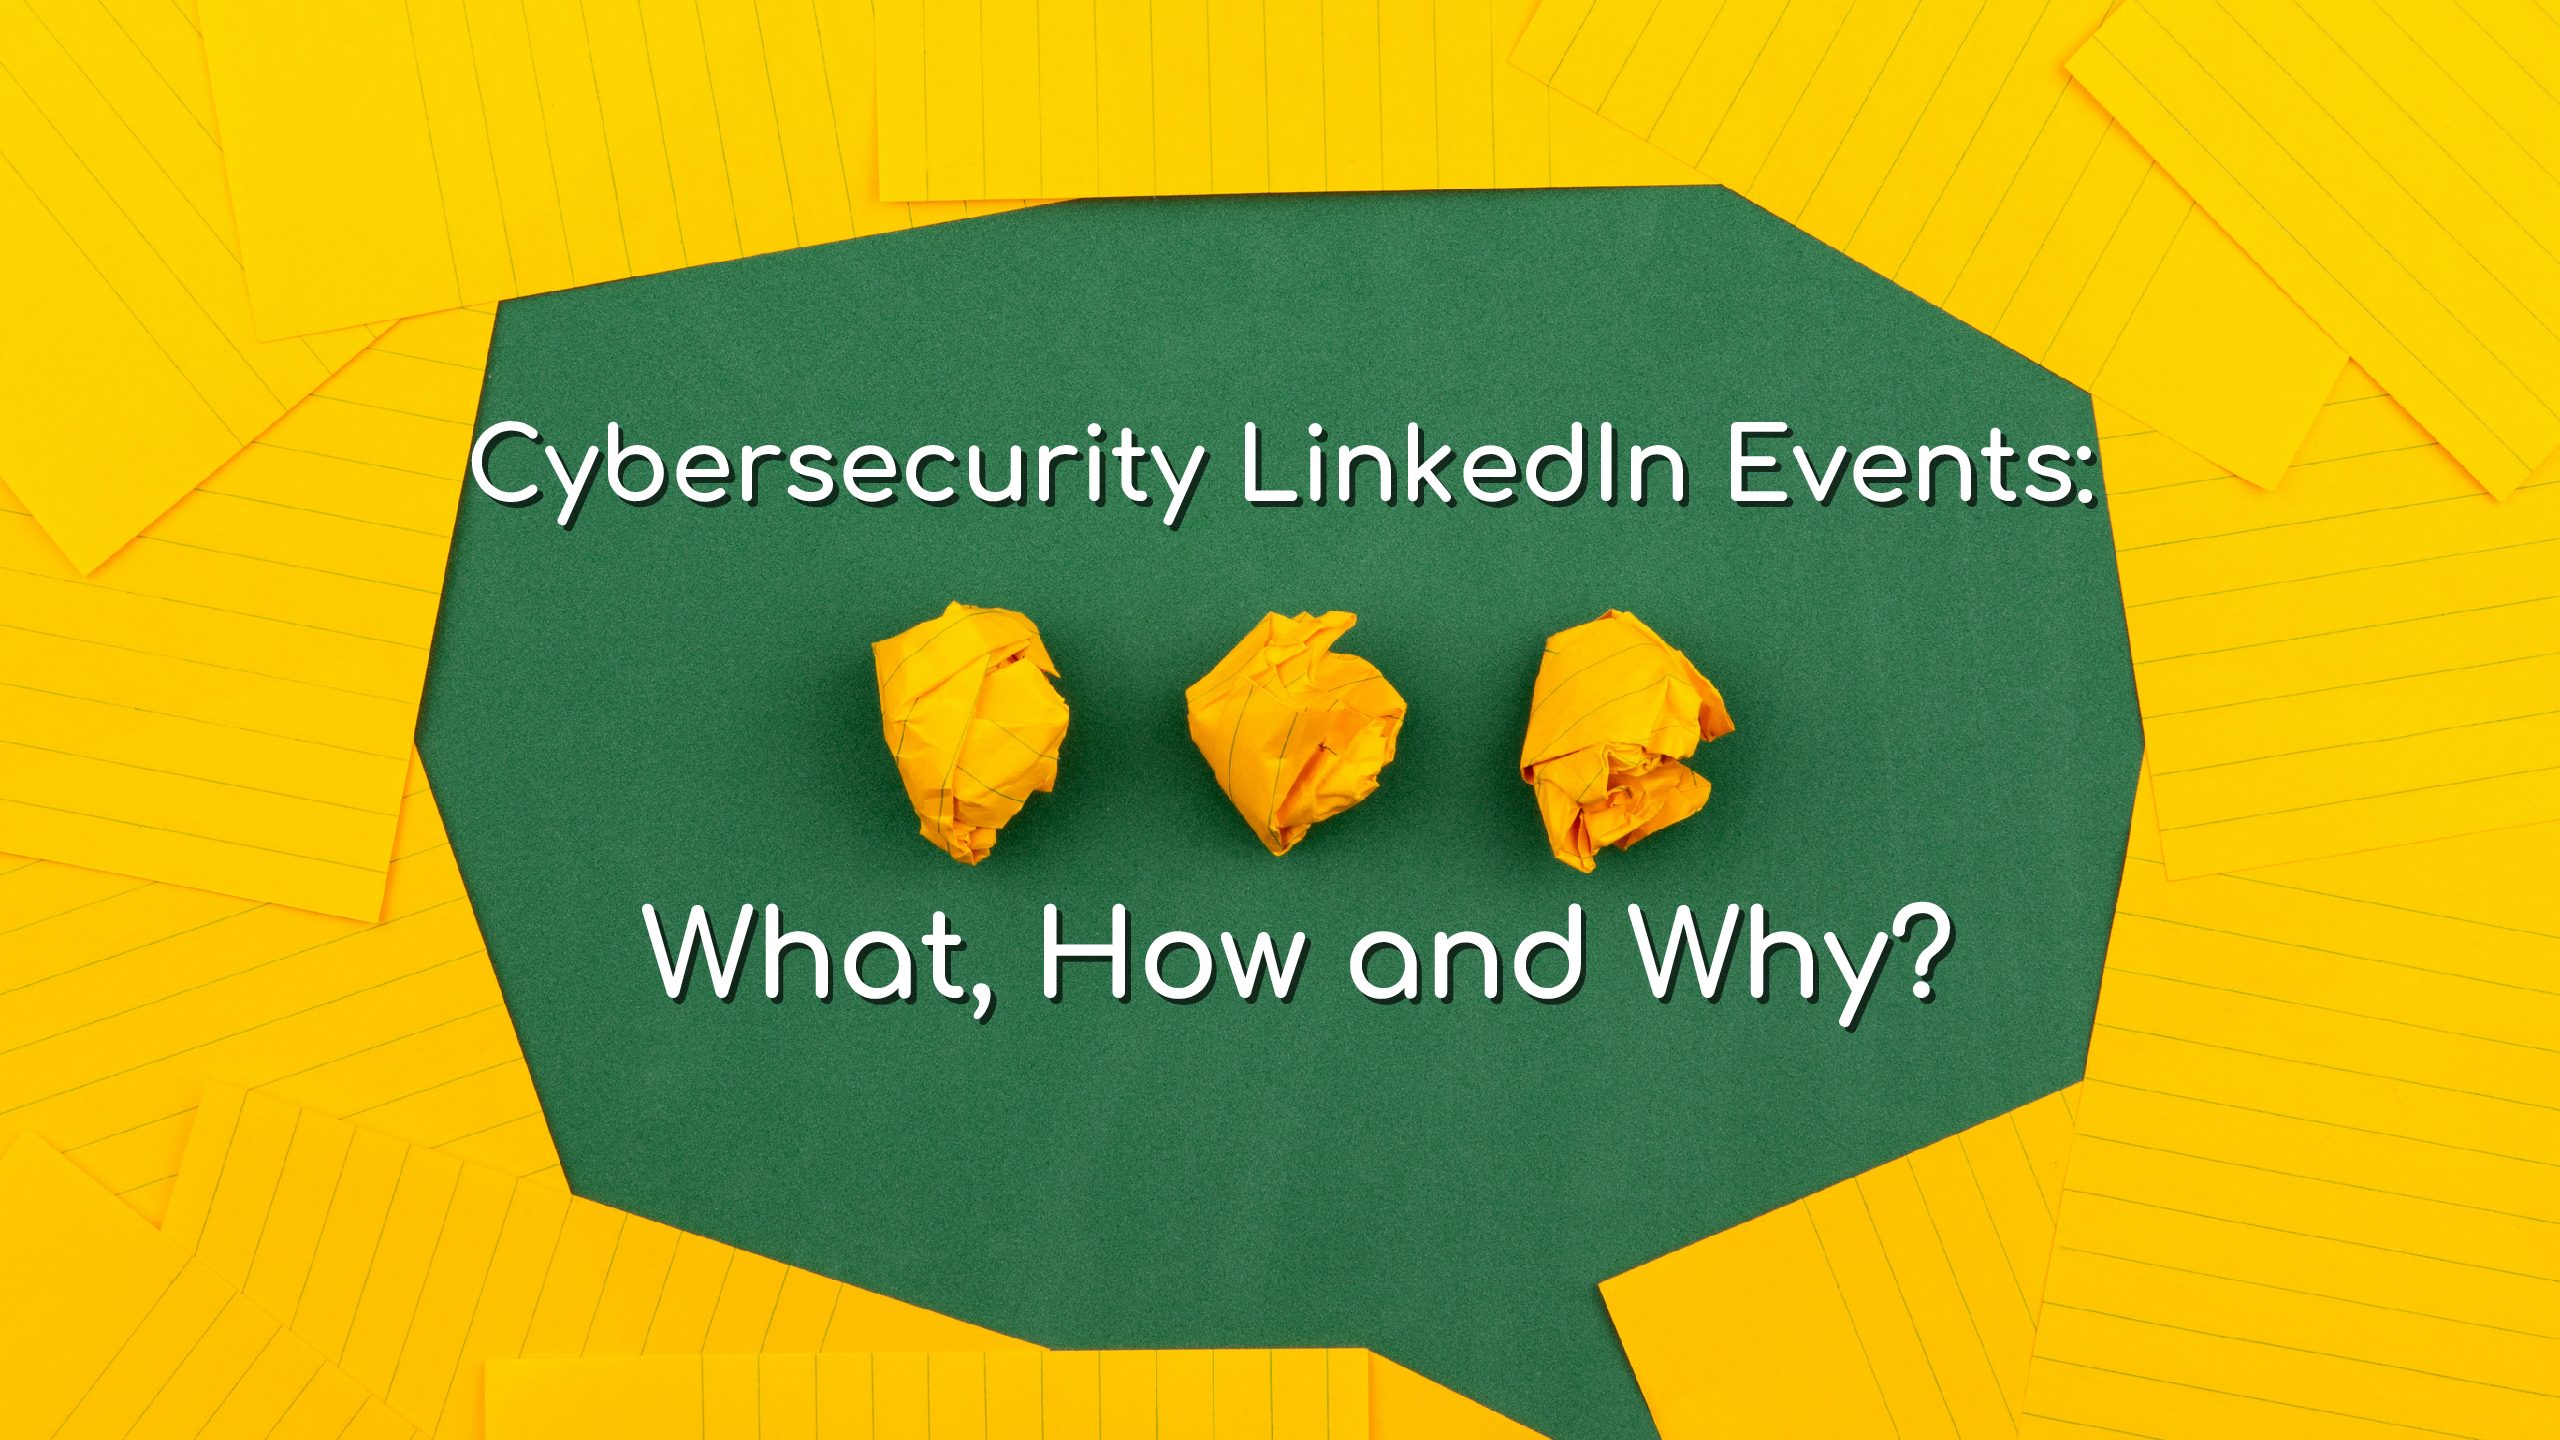 Create Cybersecurity LinkedIn Events: What, How and Why?